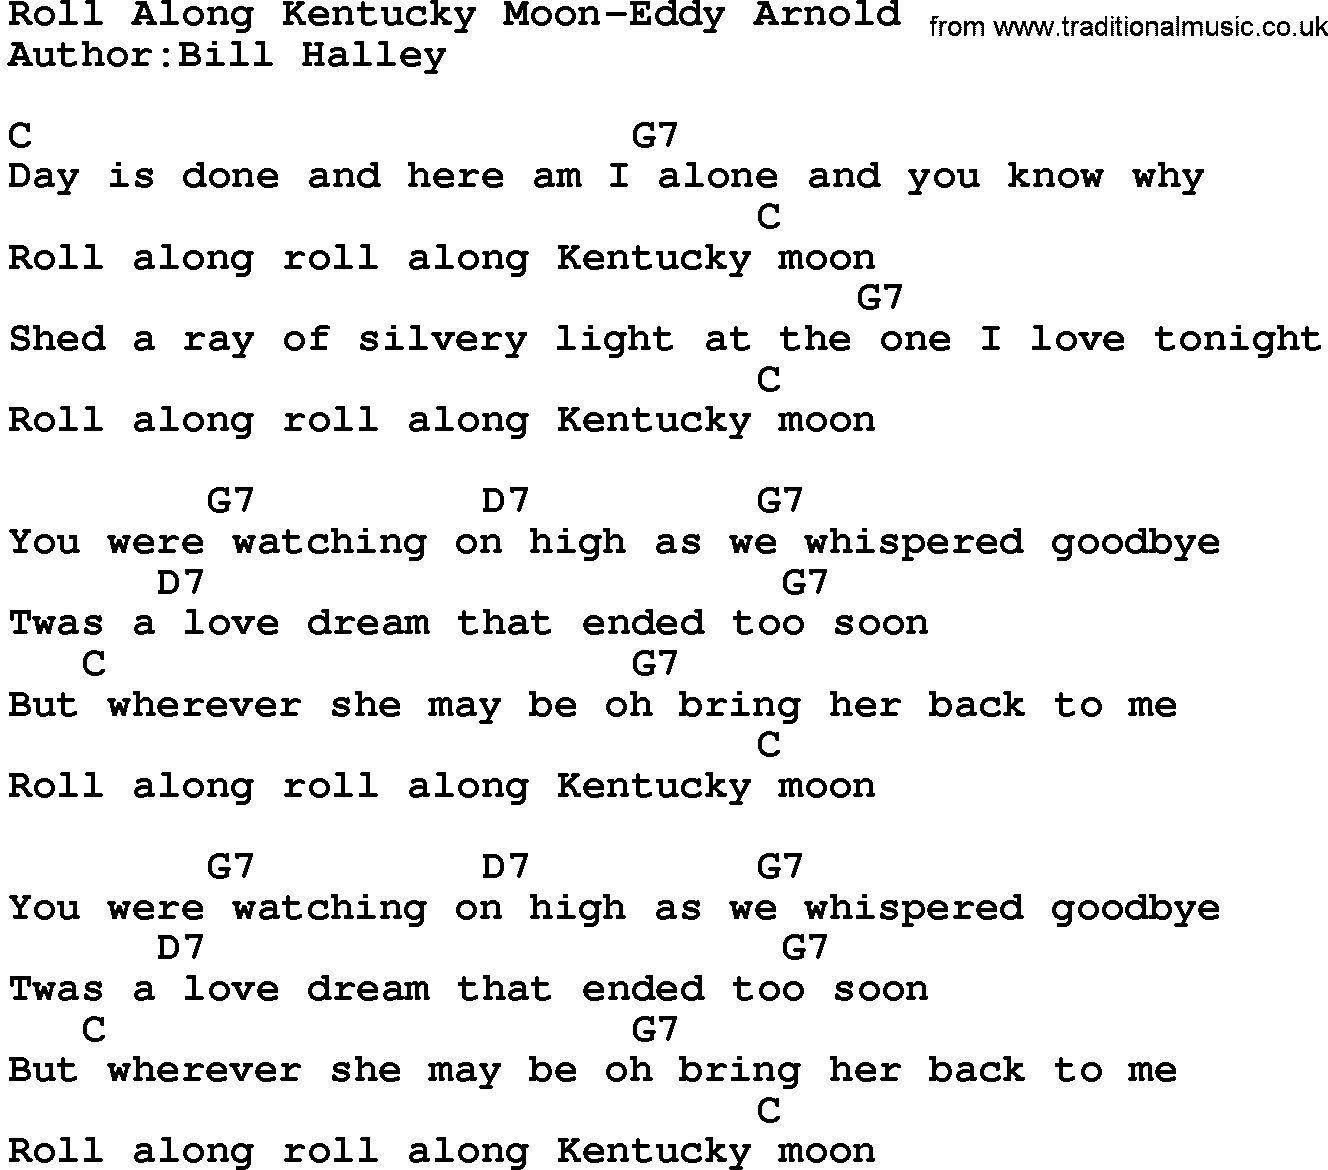 Country music song: Roll Along Kentucky Moon-Eddy Arnold  lyrics and chords